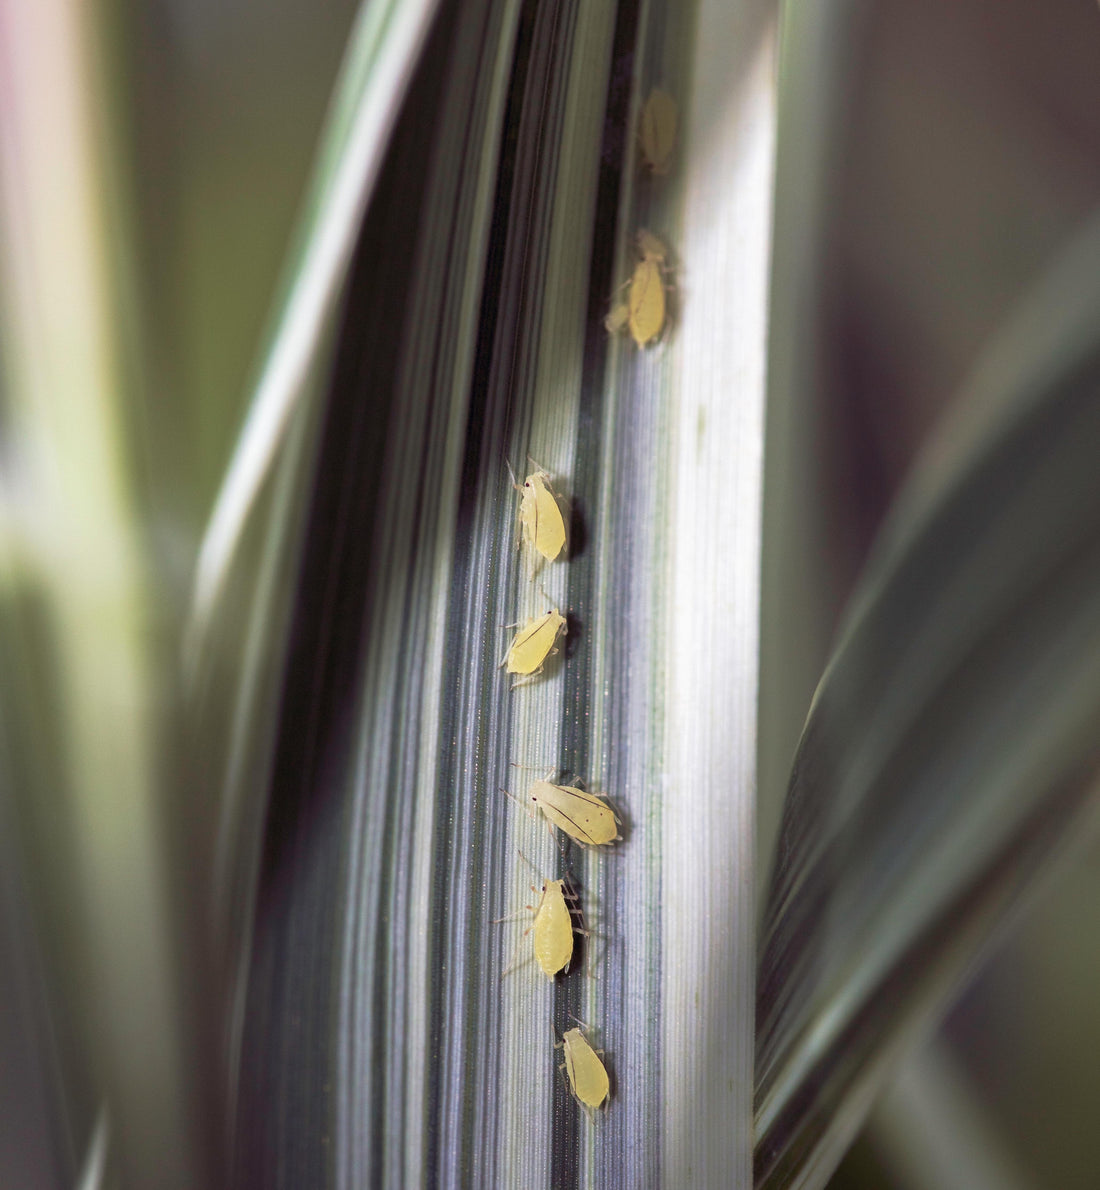 Close-up of 6 aphids on striped plant foliage